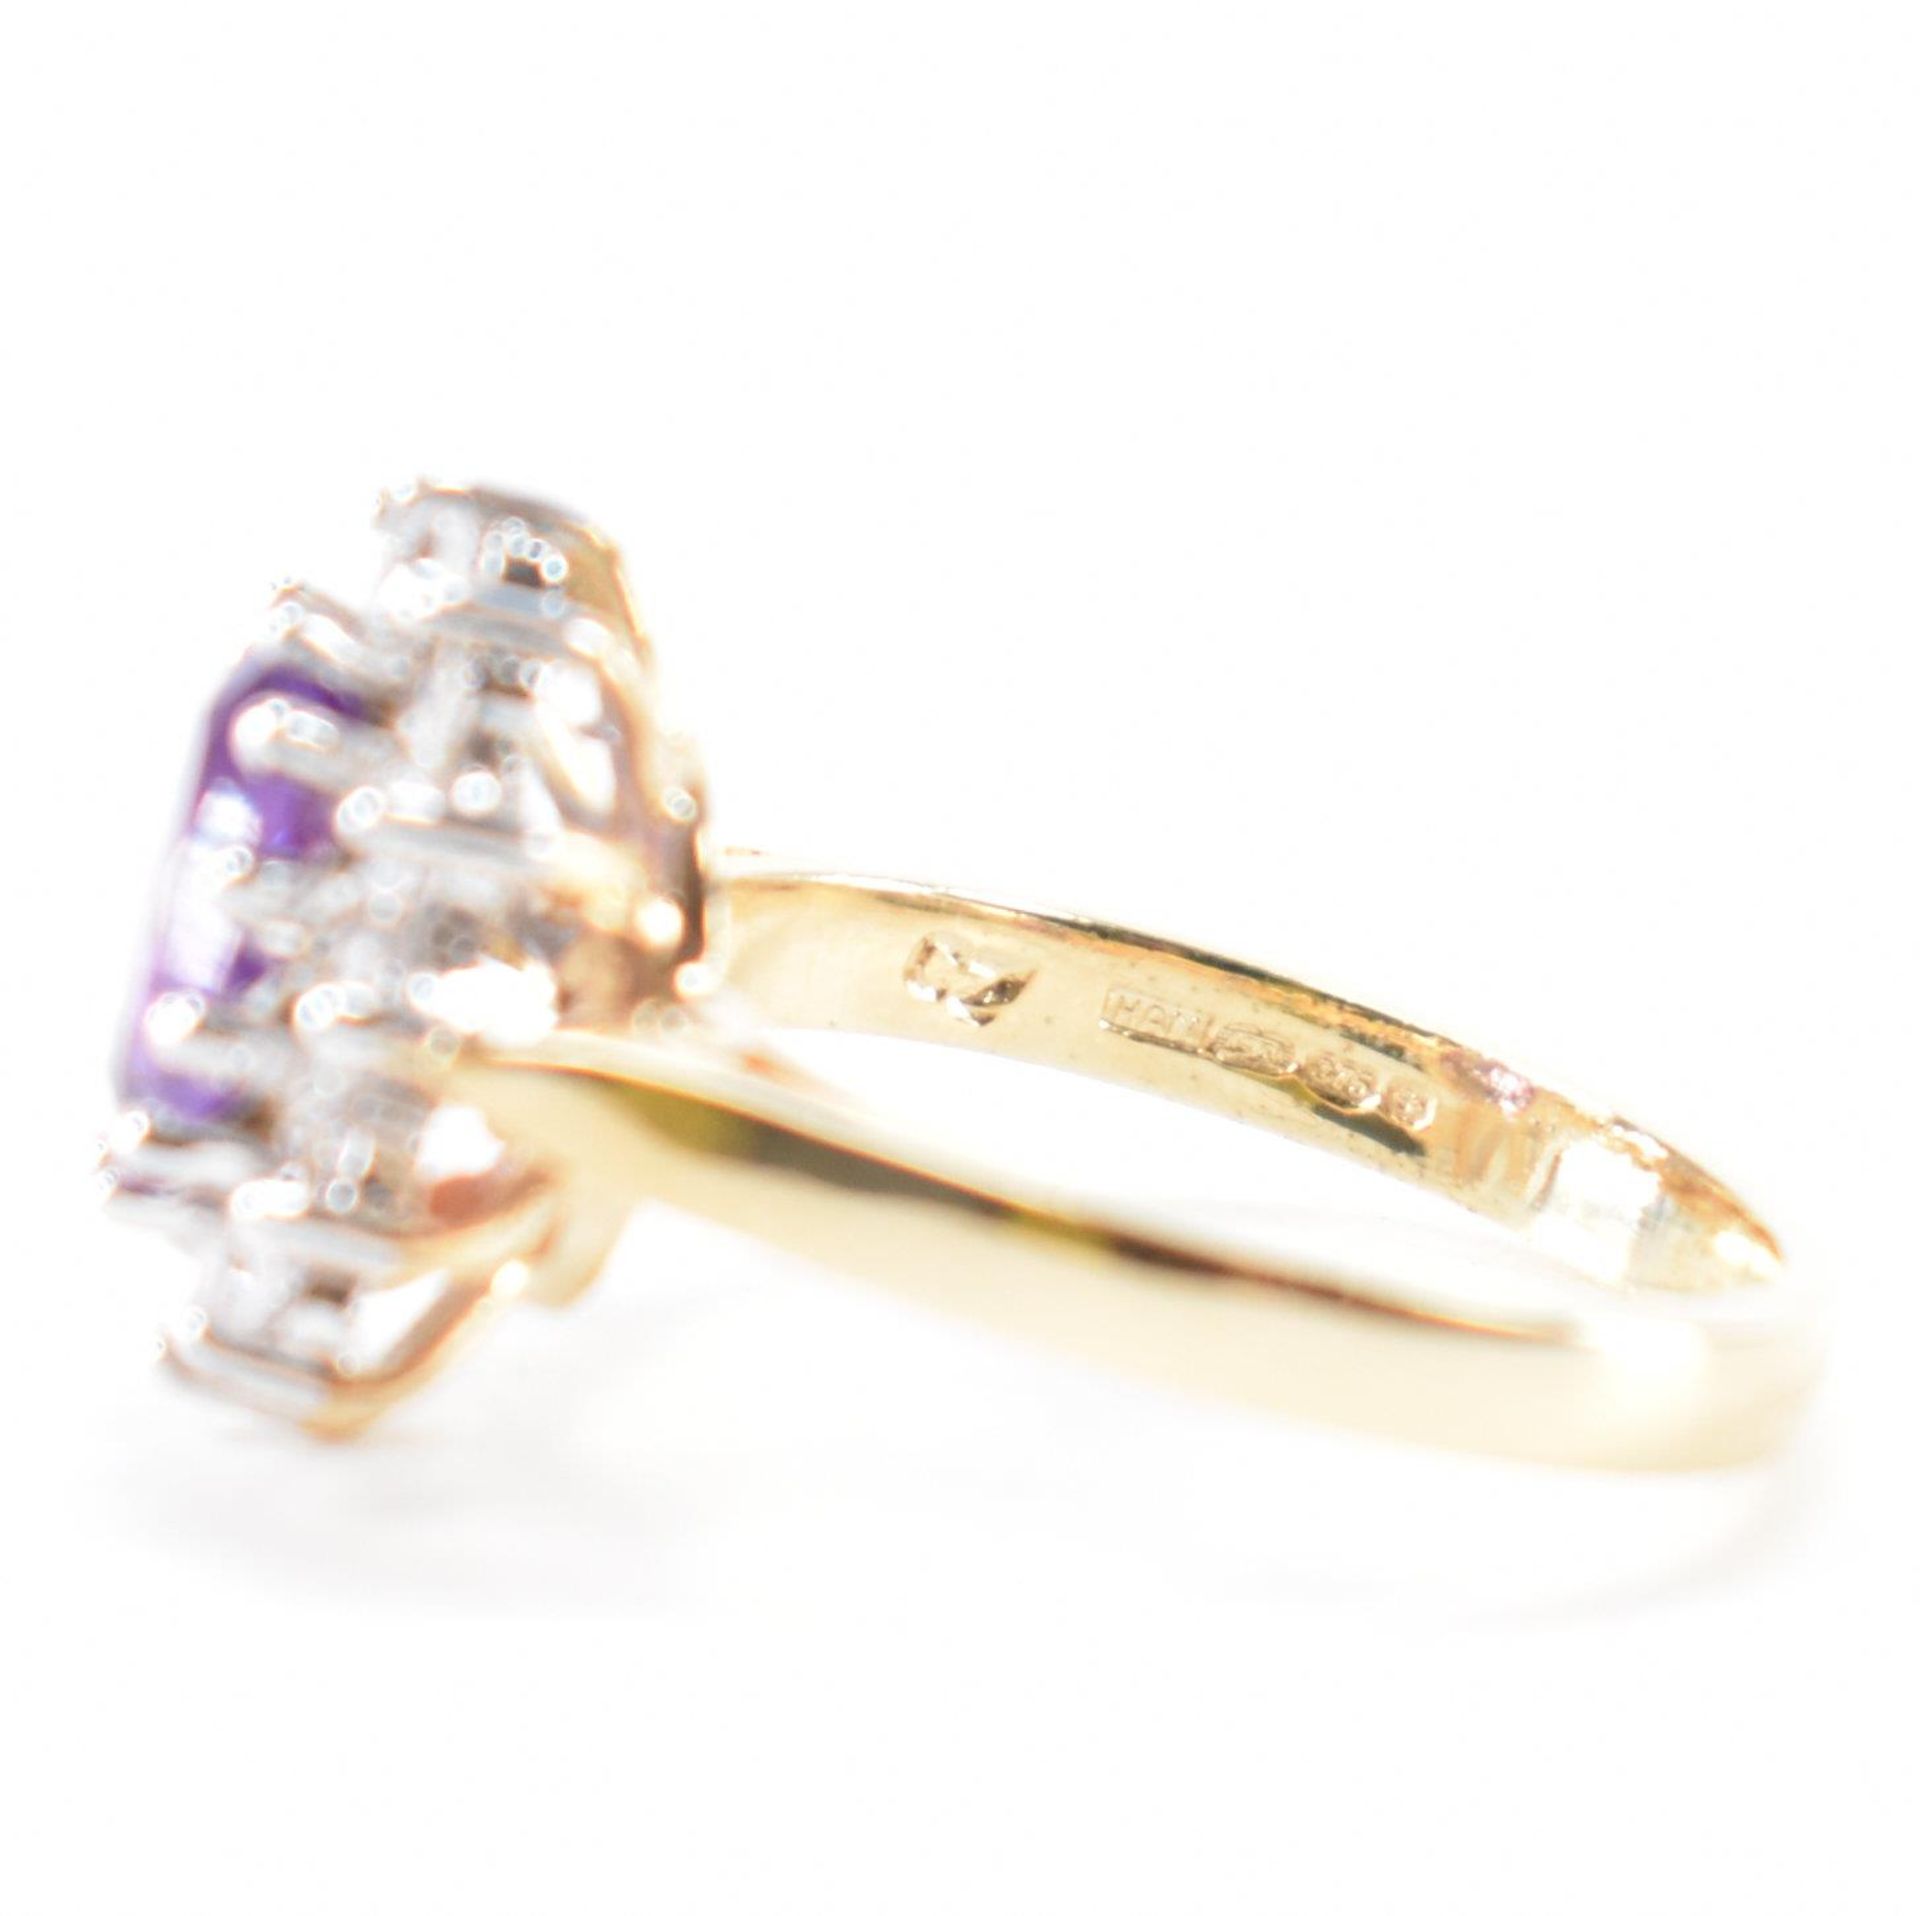 HALLMARKED 9CT GOLD AMETHYST & CZ CLUSTER RING - Image 6 of 8